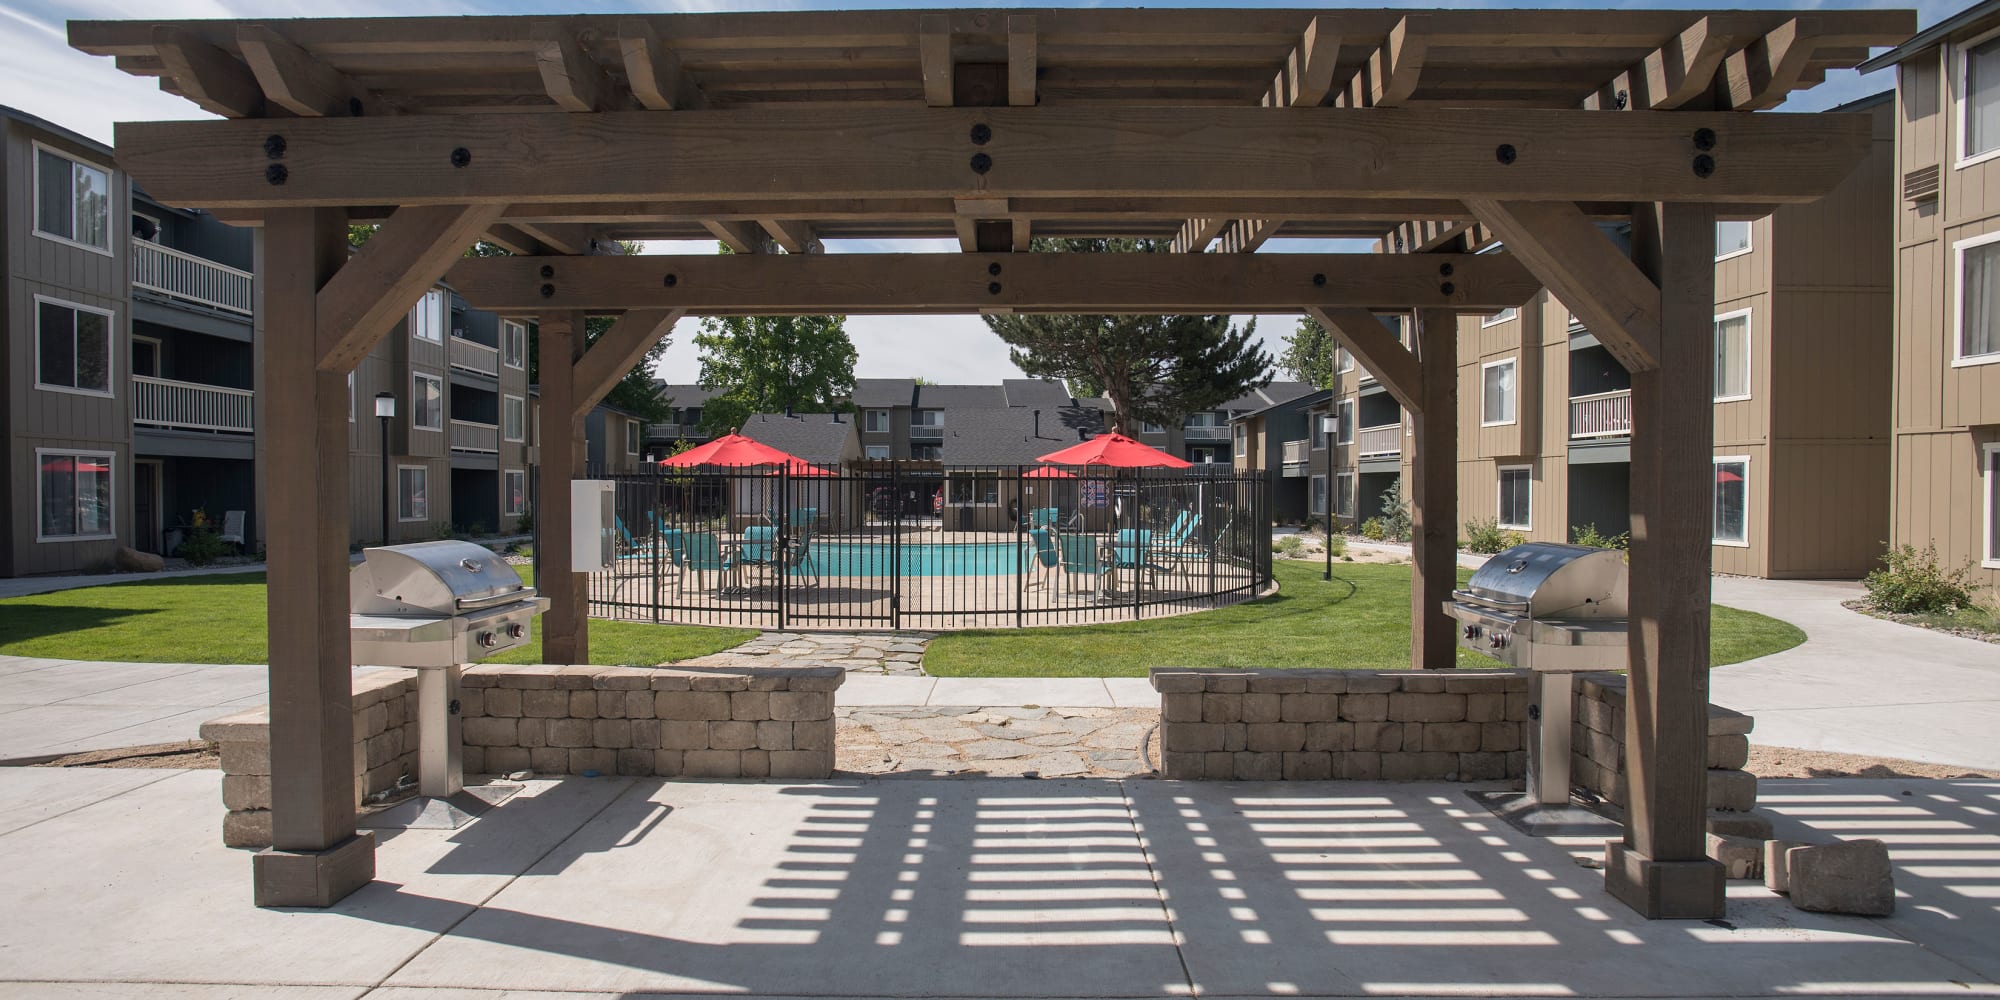 Pergola and picnic area at Keyway Apartments in Sparks, Nevada